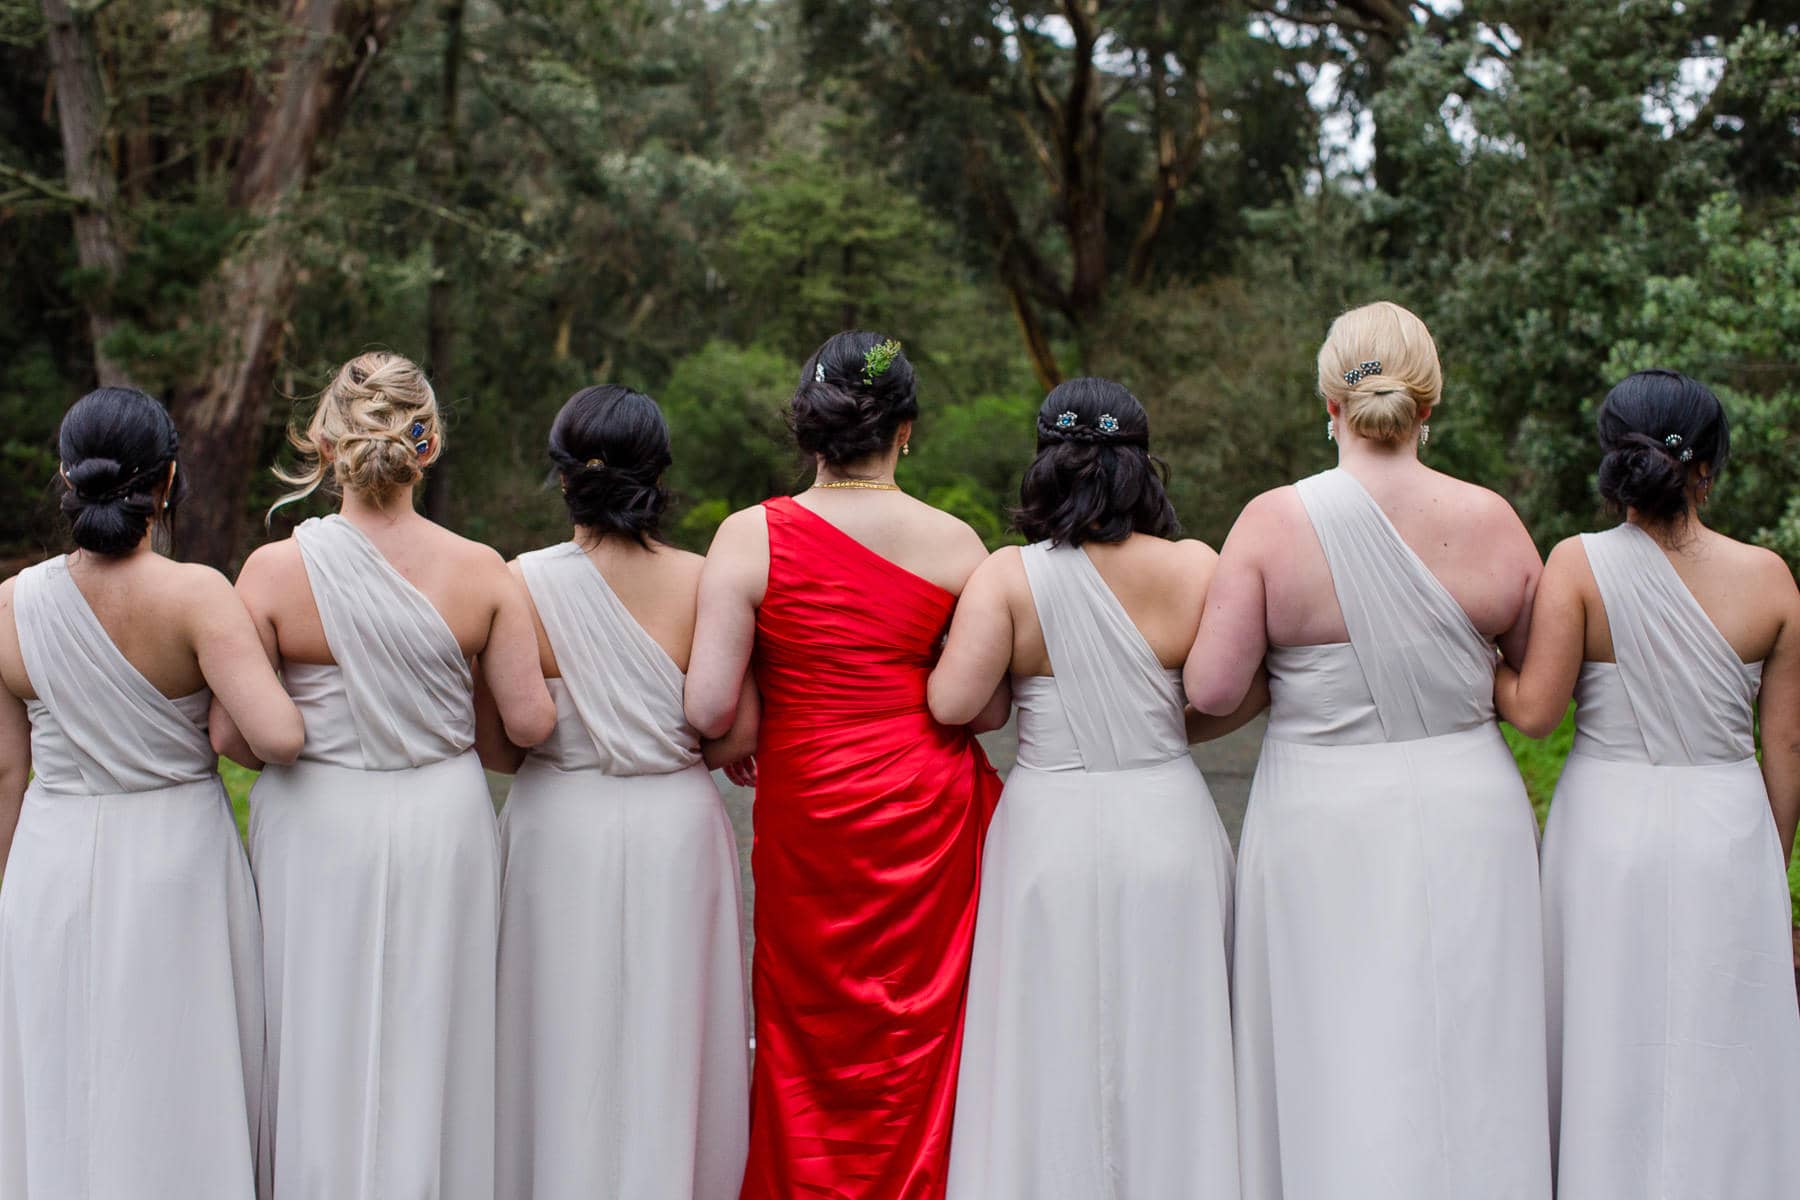 Bridesmaids lined up facing away showing details of hair and dresses